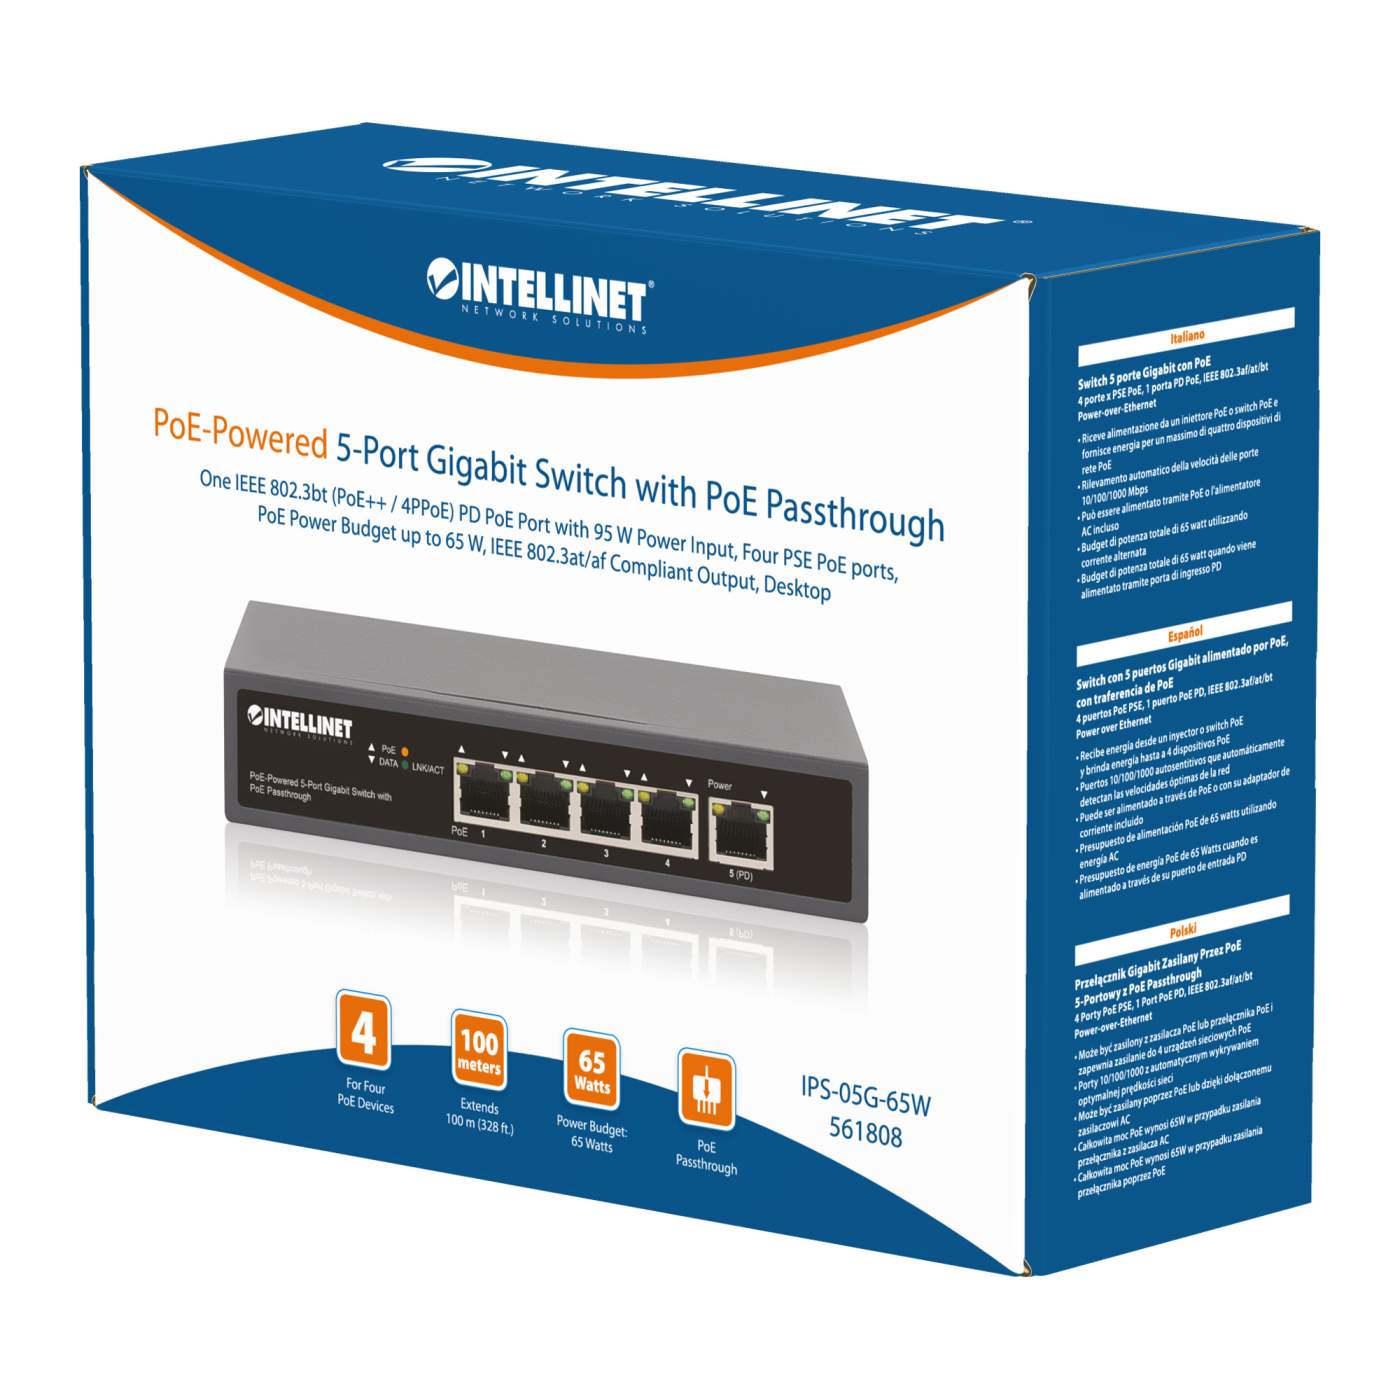 PoE-Powered 5-Port Gigabit Switch mit PoE-Passthrough Packaging Image 2